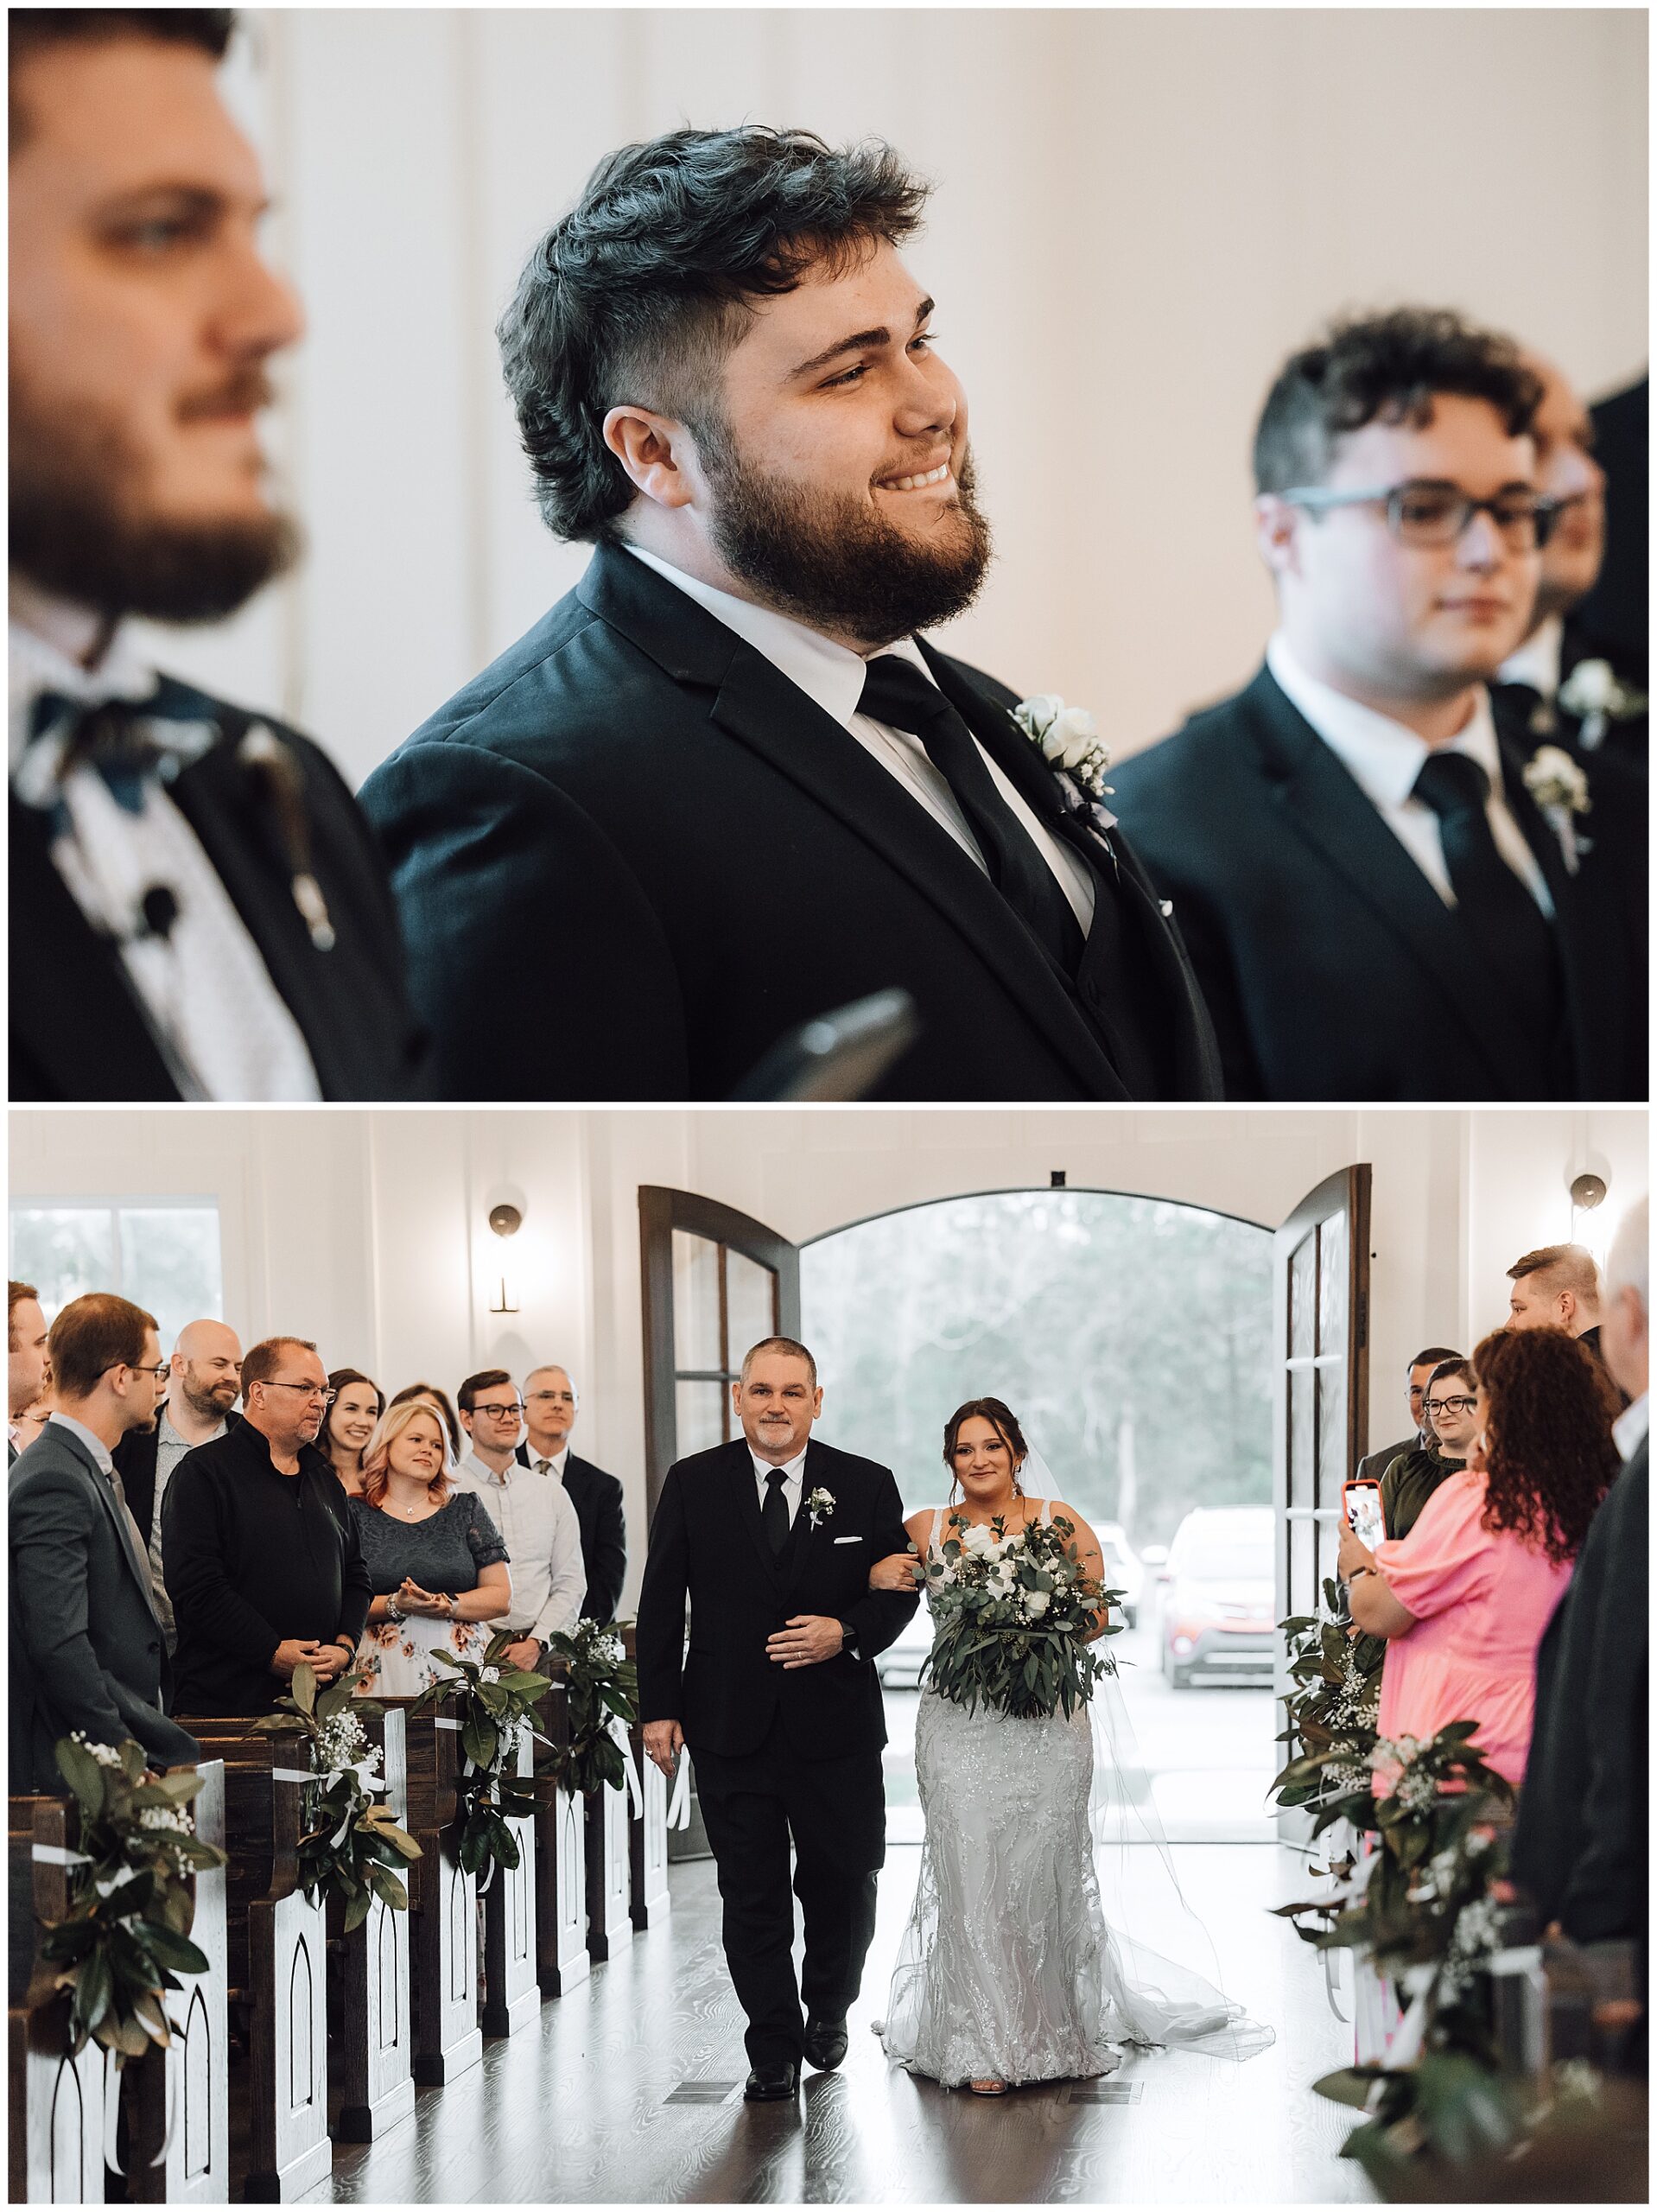 Groom watches as his bride's father walks her down the aisle of their wedding